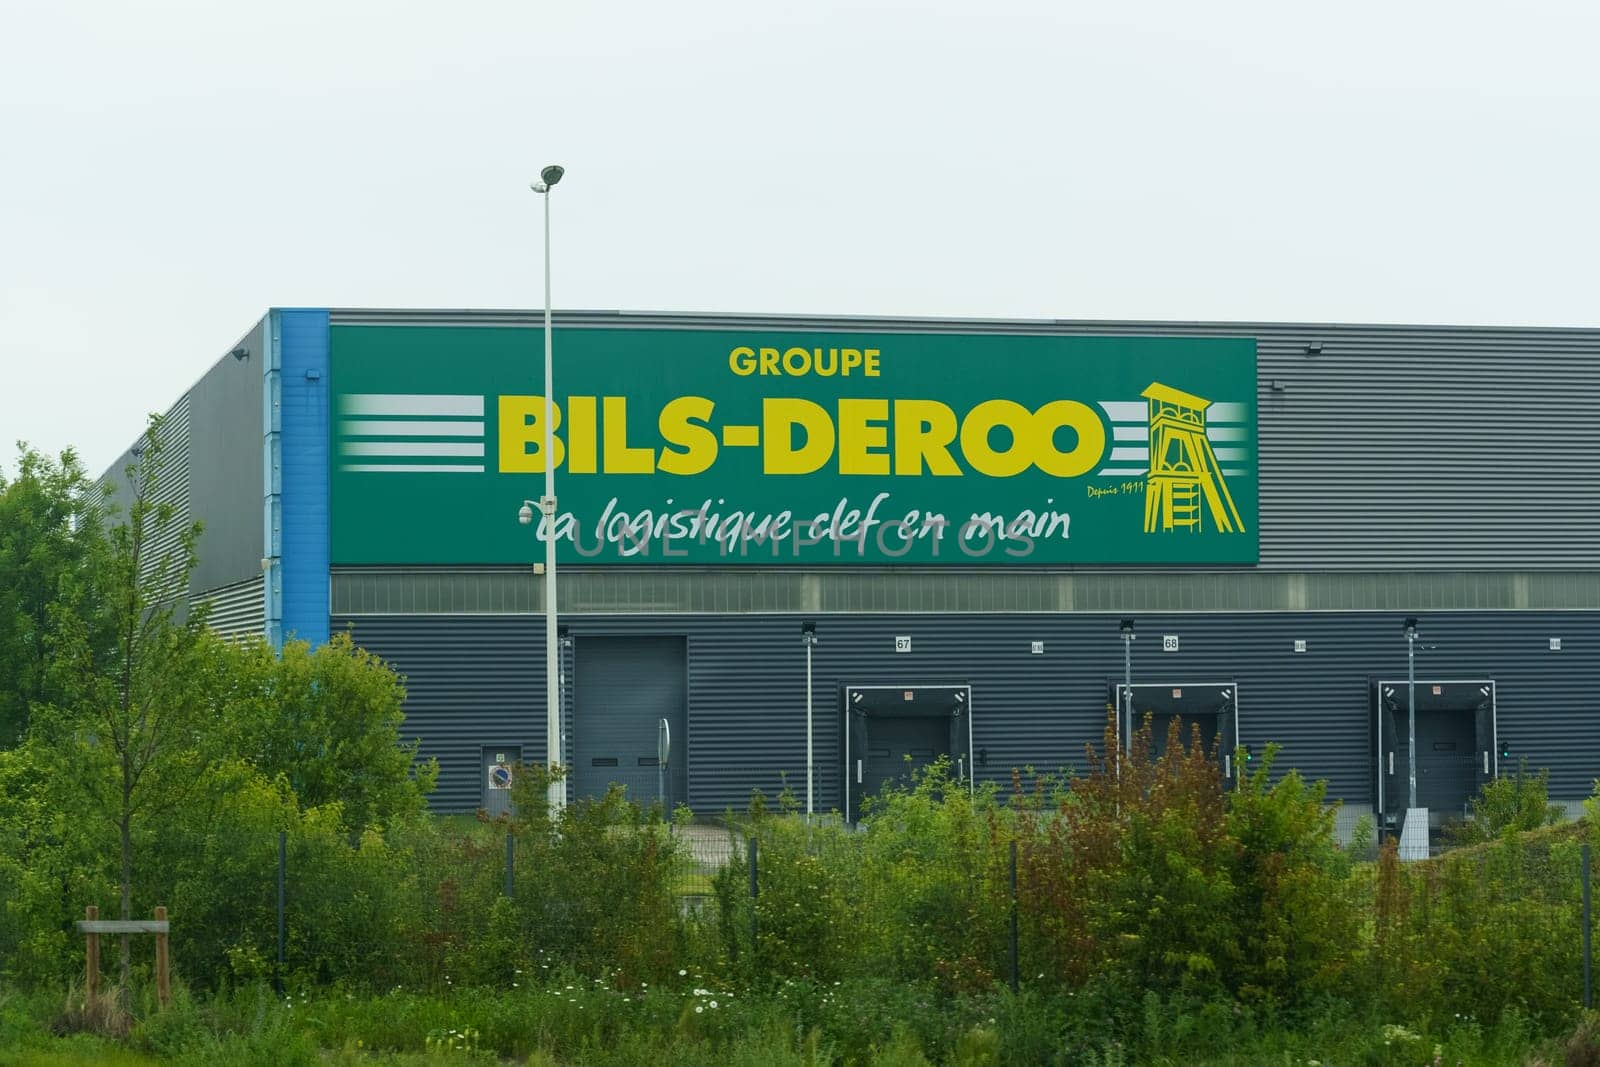 Bils-Deroo Logistics Facility Exterior on a Cloudy Day by Sd28DimoN_1976